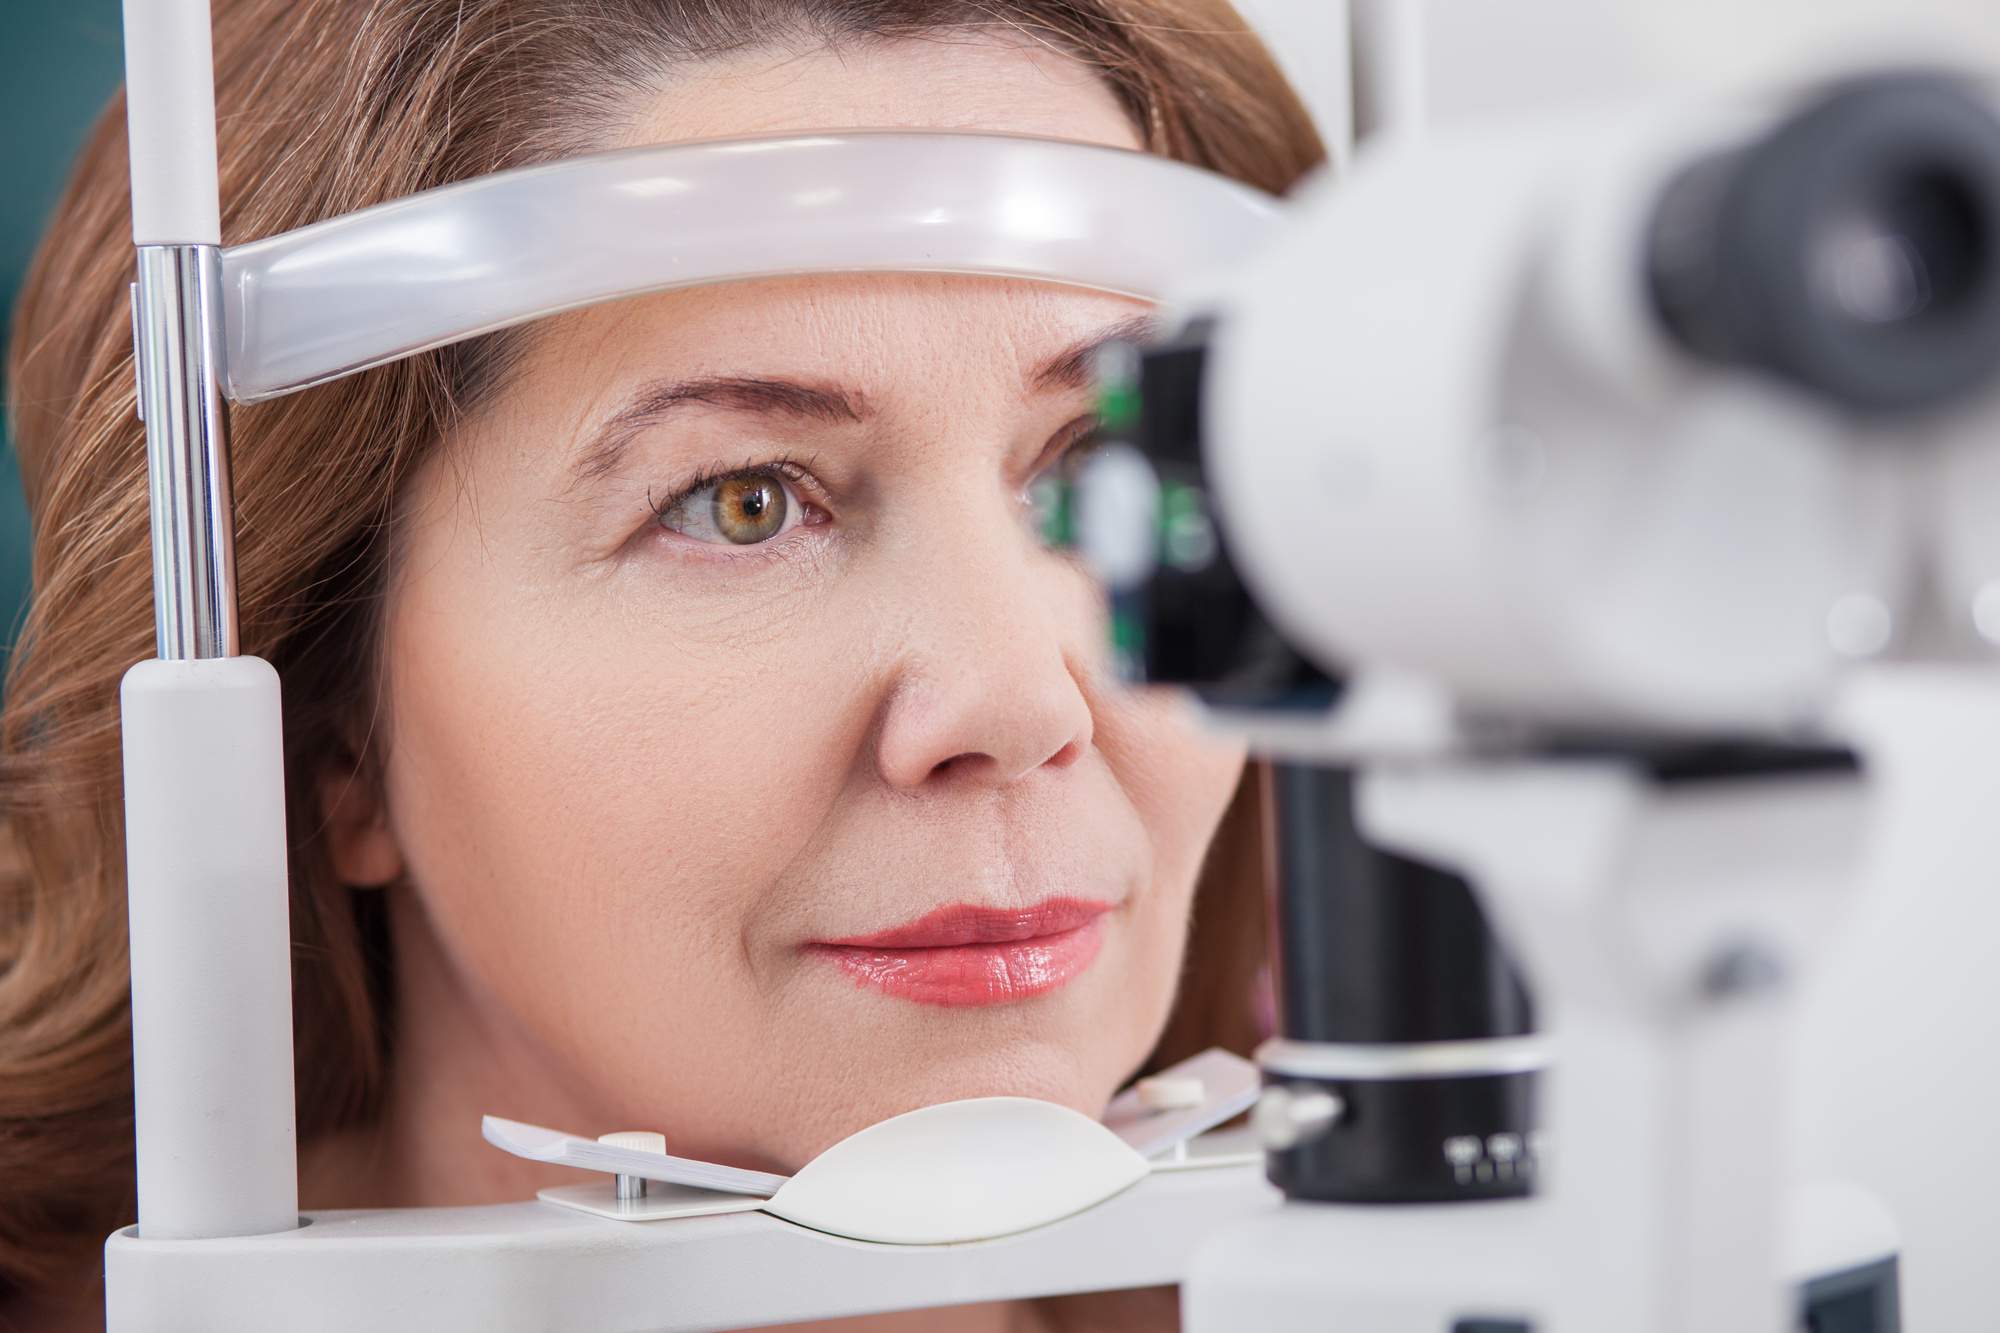 Laser Eye Surgery vs. LASIK: What Are the Differences?